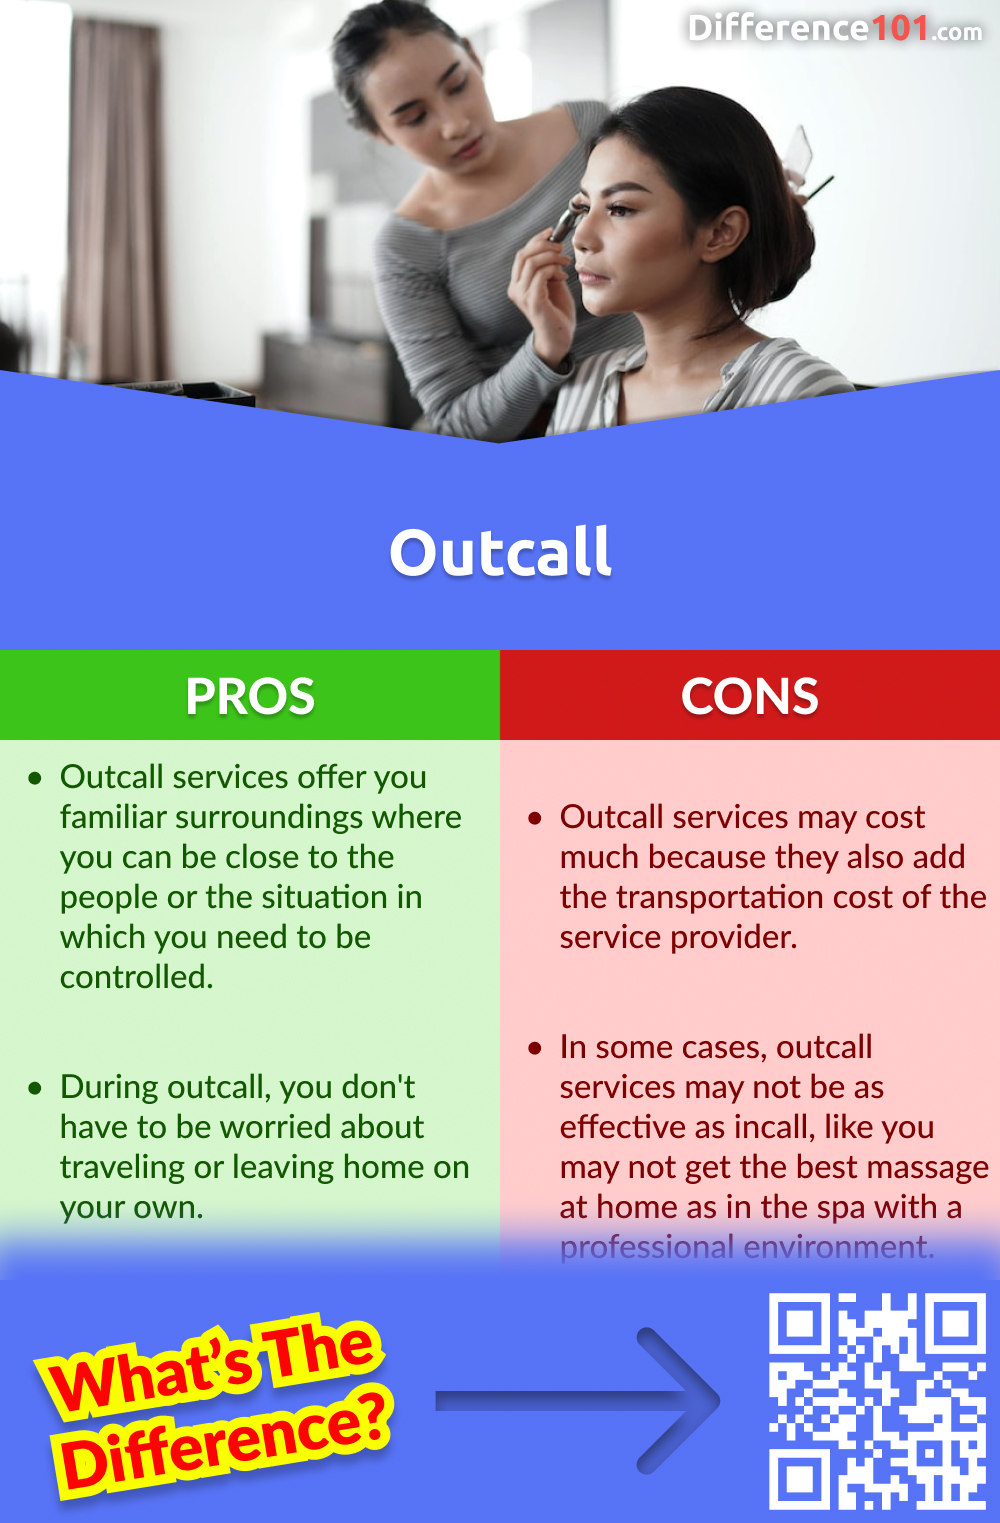 Outcall Pros and Cons